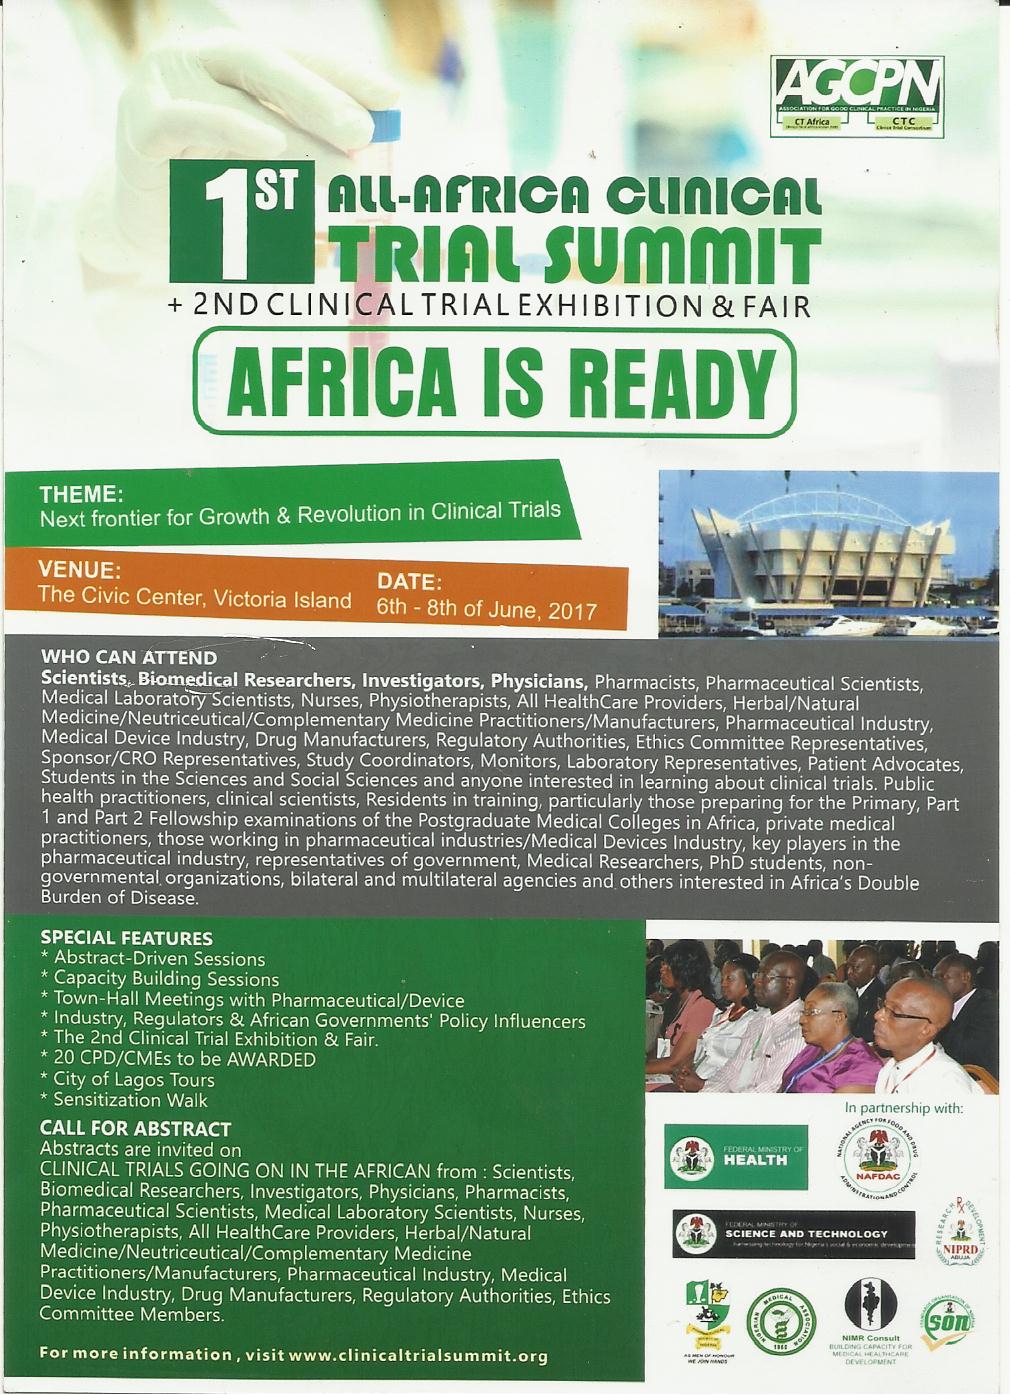 All-African Clinical Trial Summit